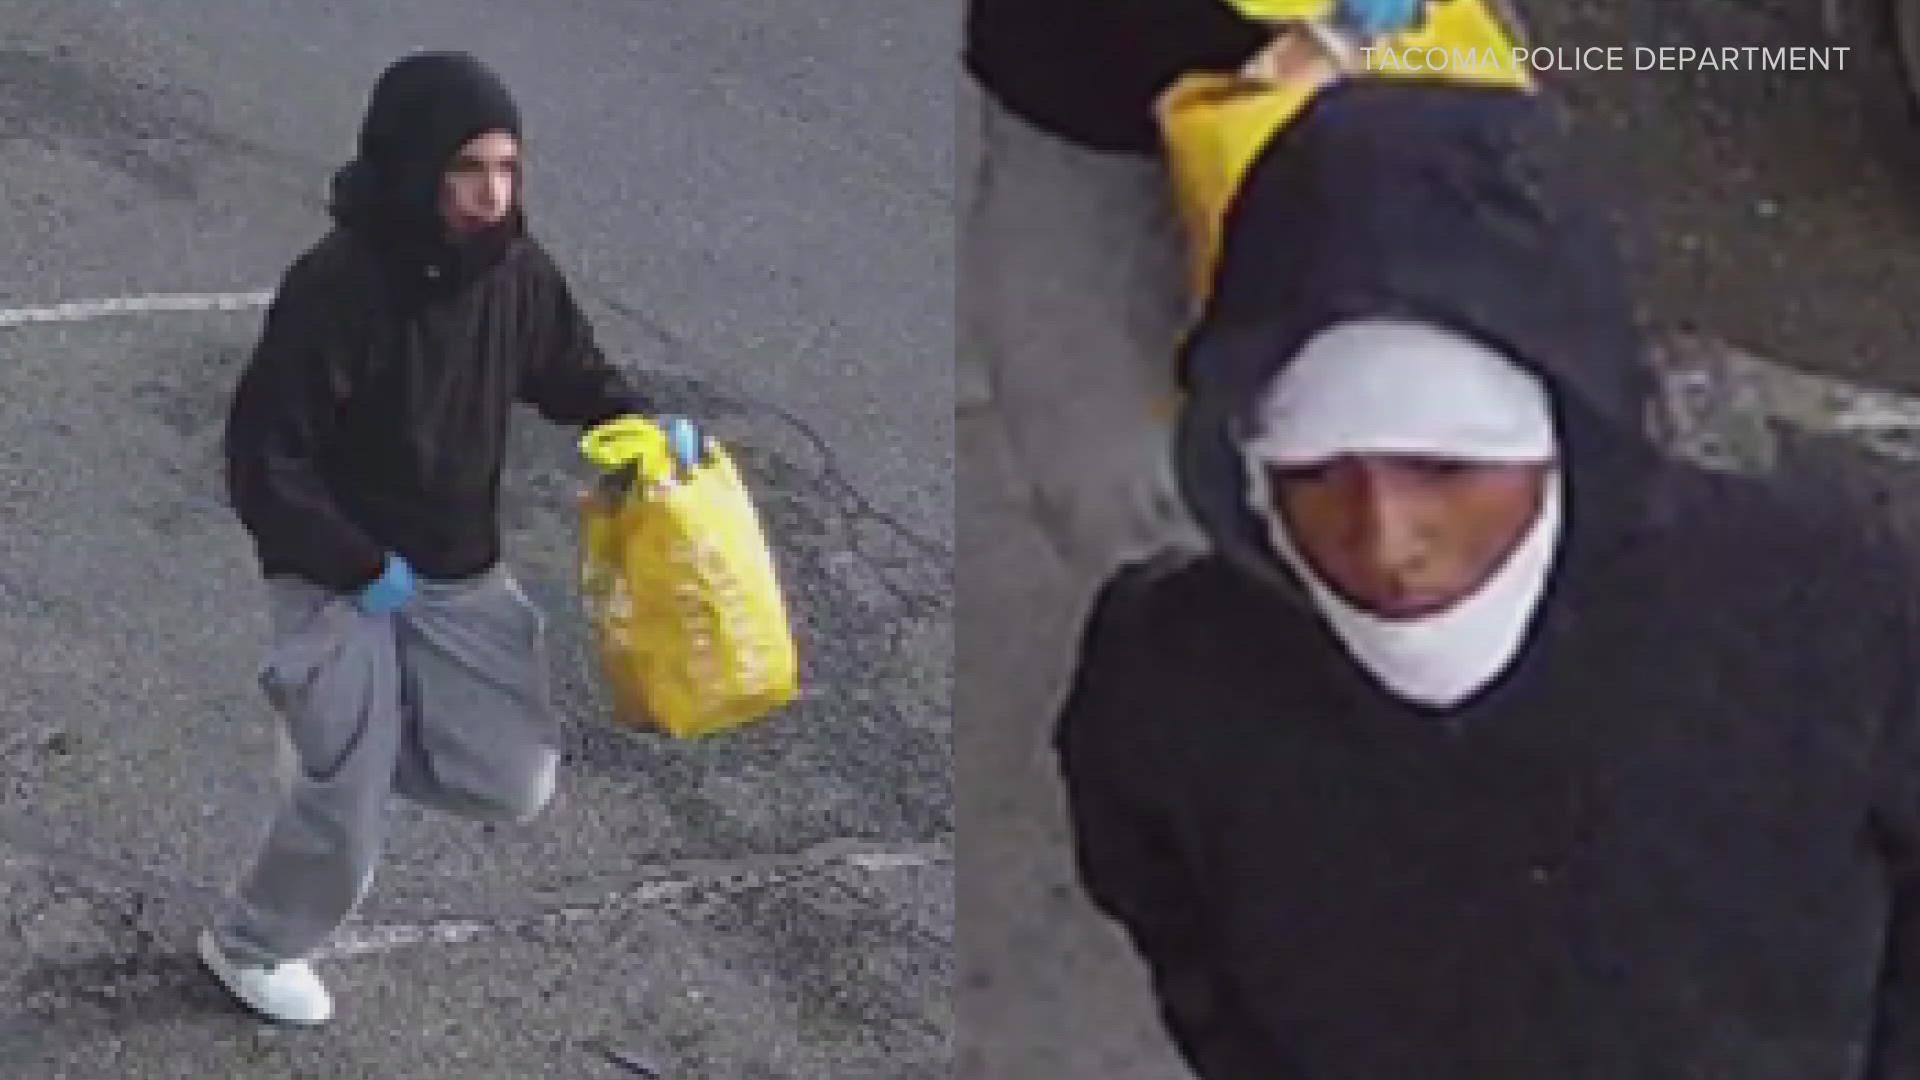 The two suspects are believed to be responsible for robberies in at least seven different locations.